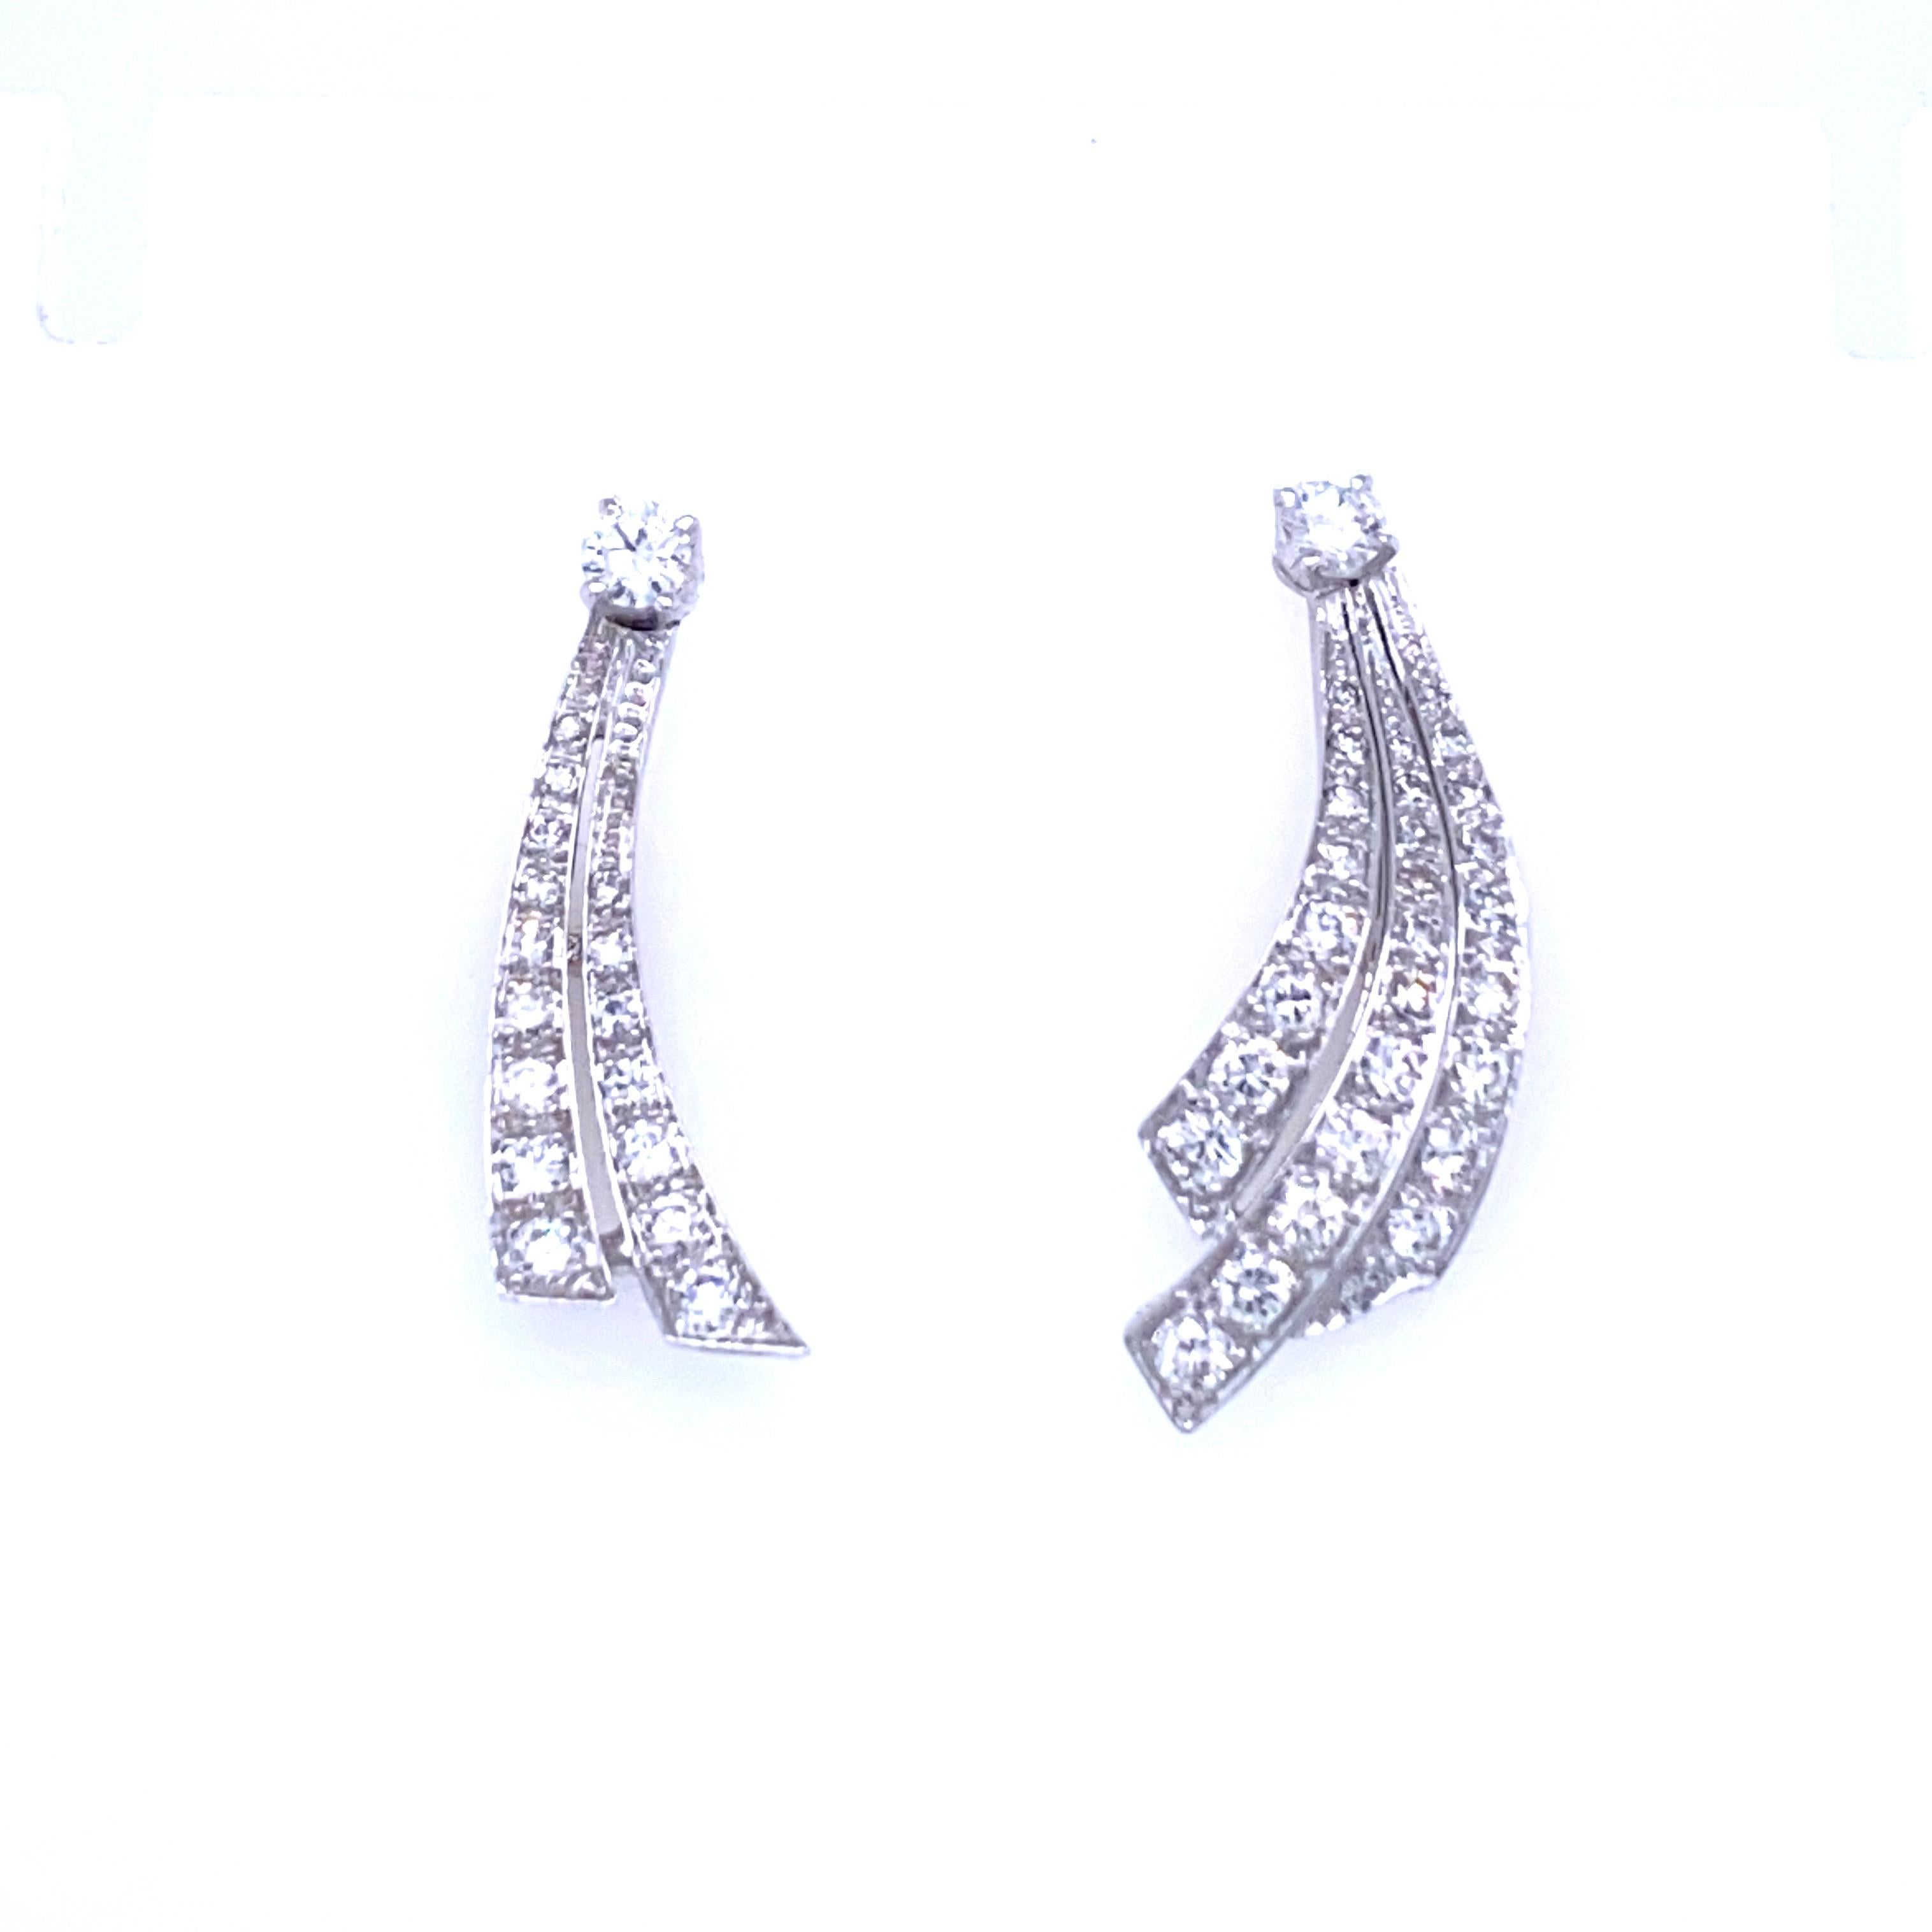 These Estate with a very contemporary taste diamond platinum earrings feature sparkling Round brilliant cut diamonds weighing approximately 2.20 carat. graded F-G color with VvS clarity. 
Circa 1960, Italy

Please note, each earring is different